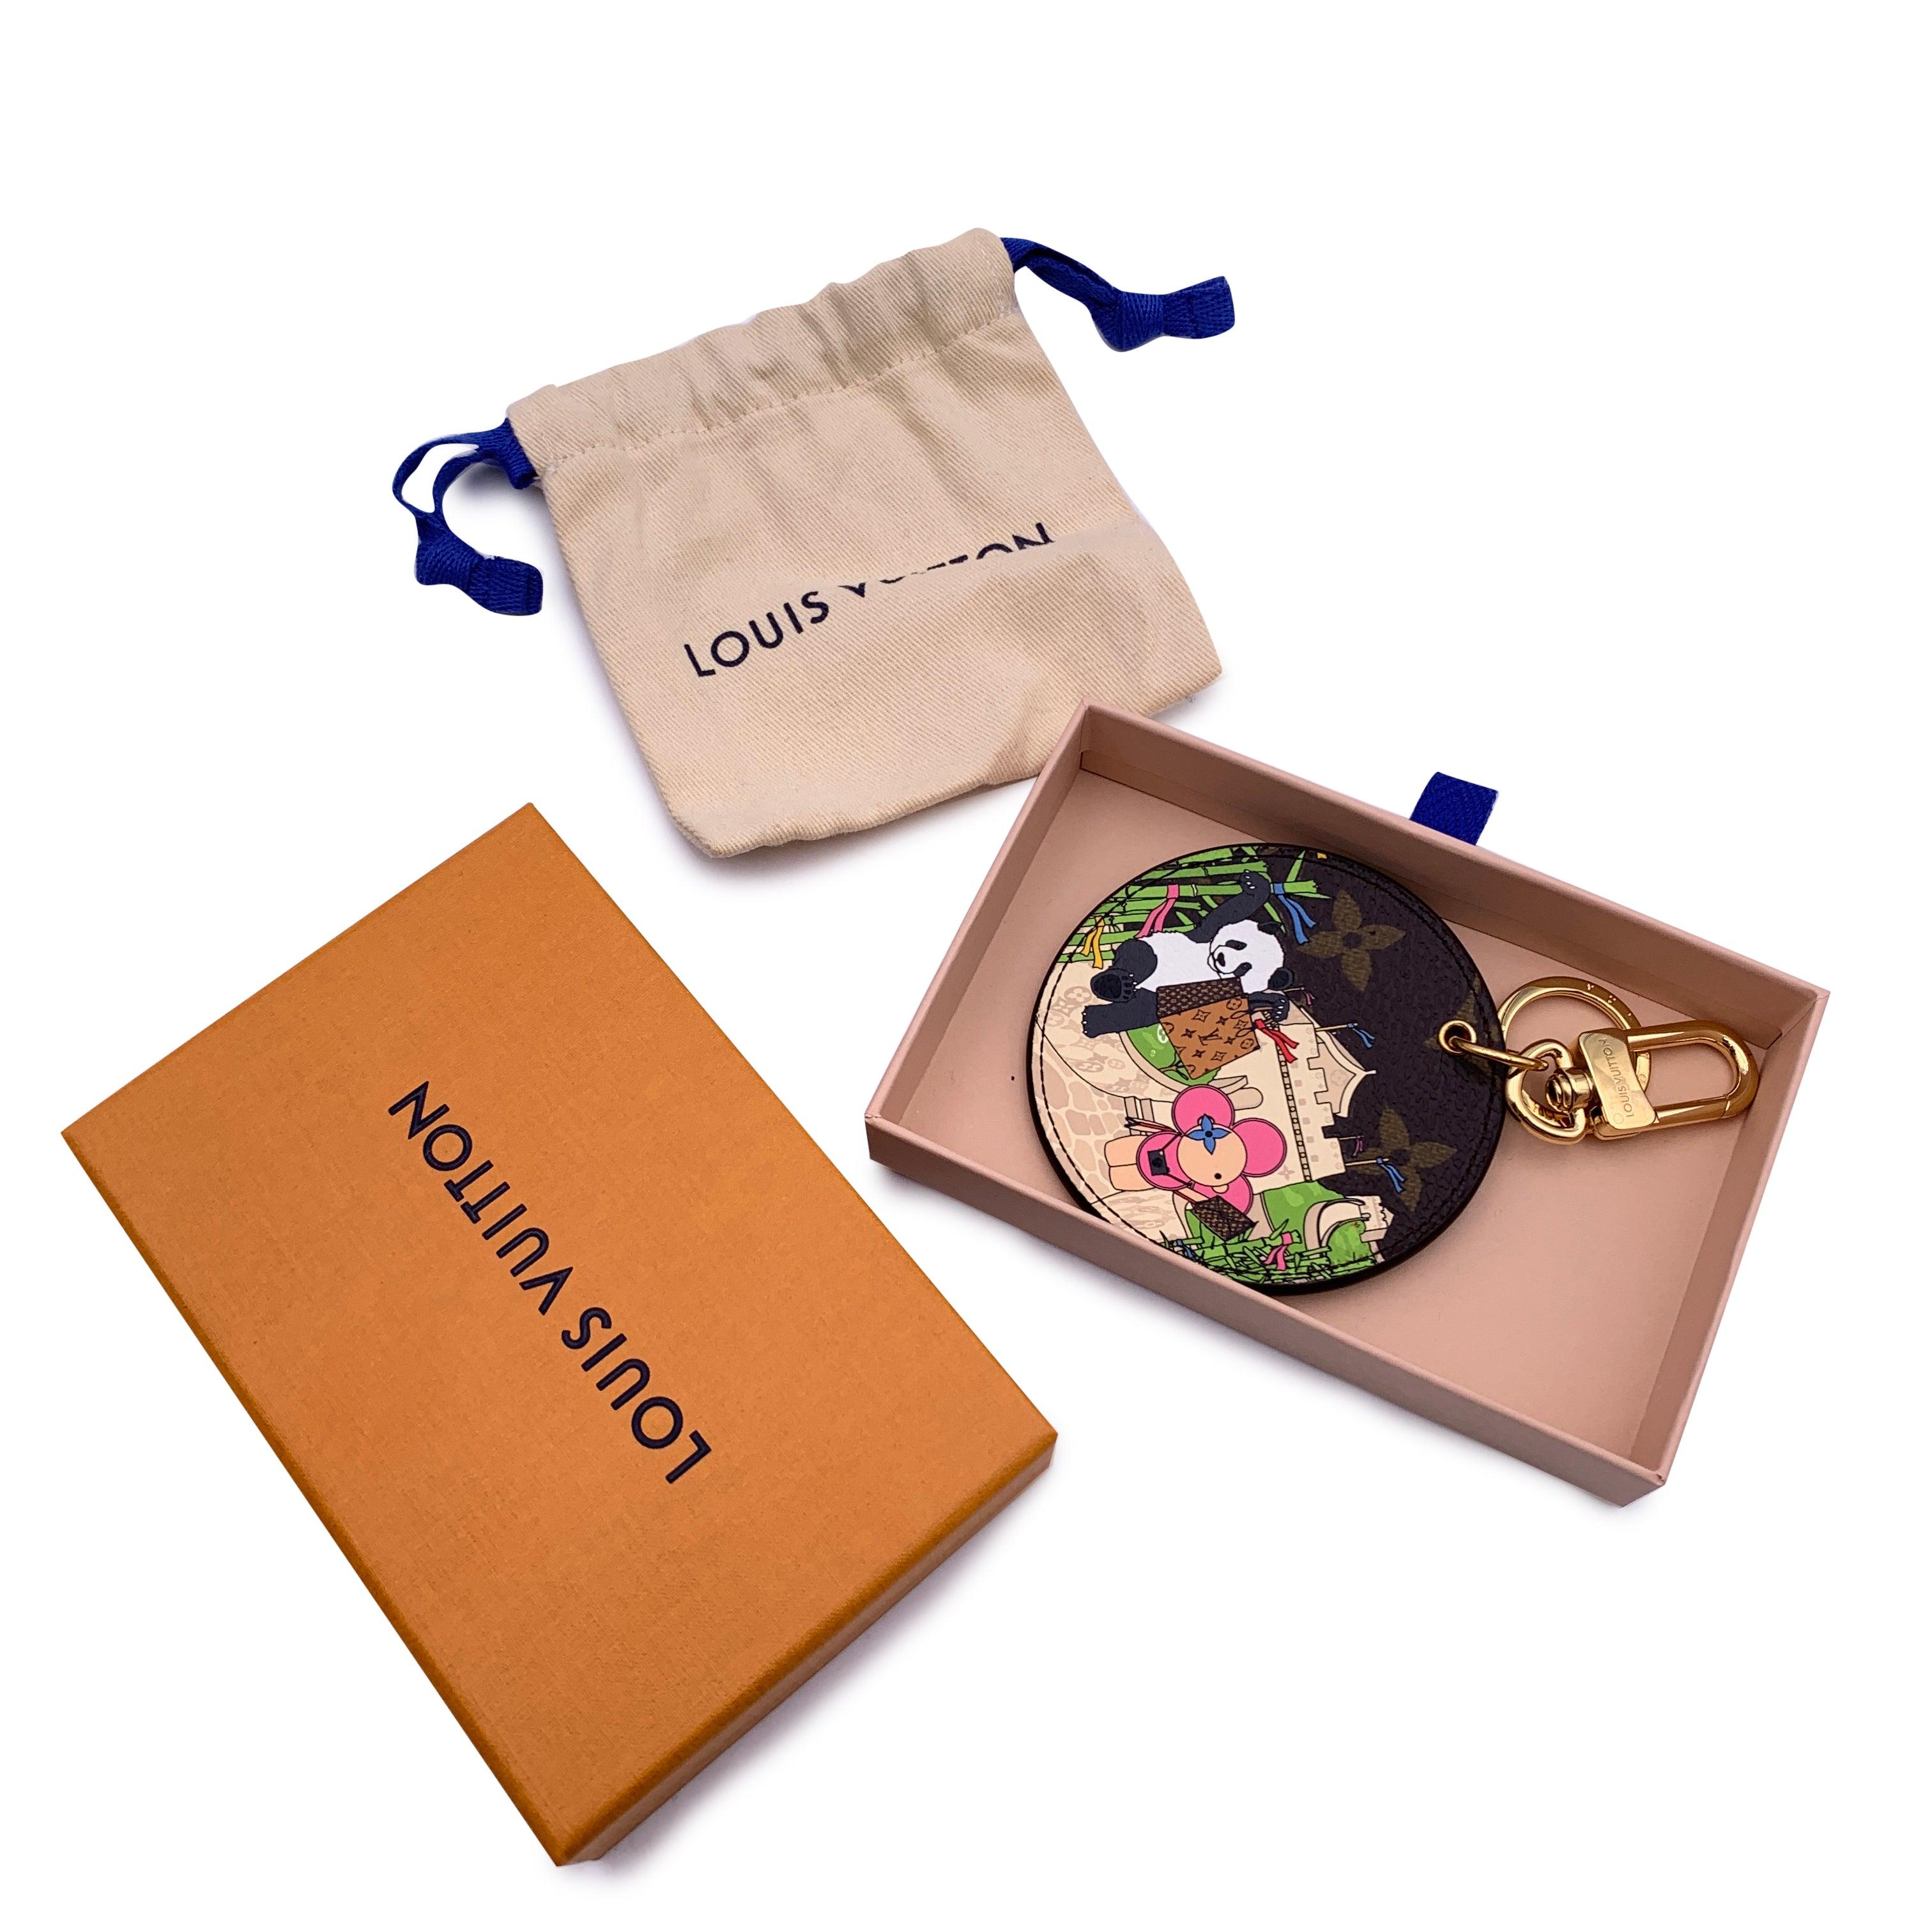 Louis Vuitton China Wall Key Holder/Bag Charm. It features a colorful illustration of the LV mascot Vivienne enjoying a walk in the Great Wall in China with a panda on a side. Light blue leather on the other side. Gold metal clasp and key ring. The